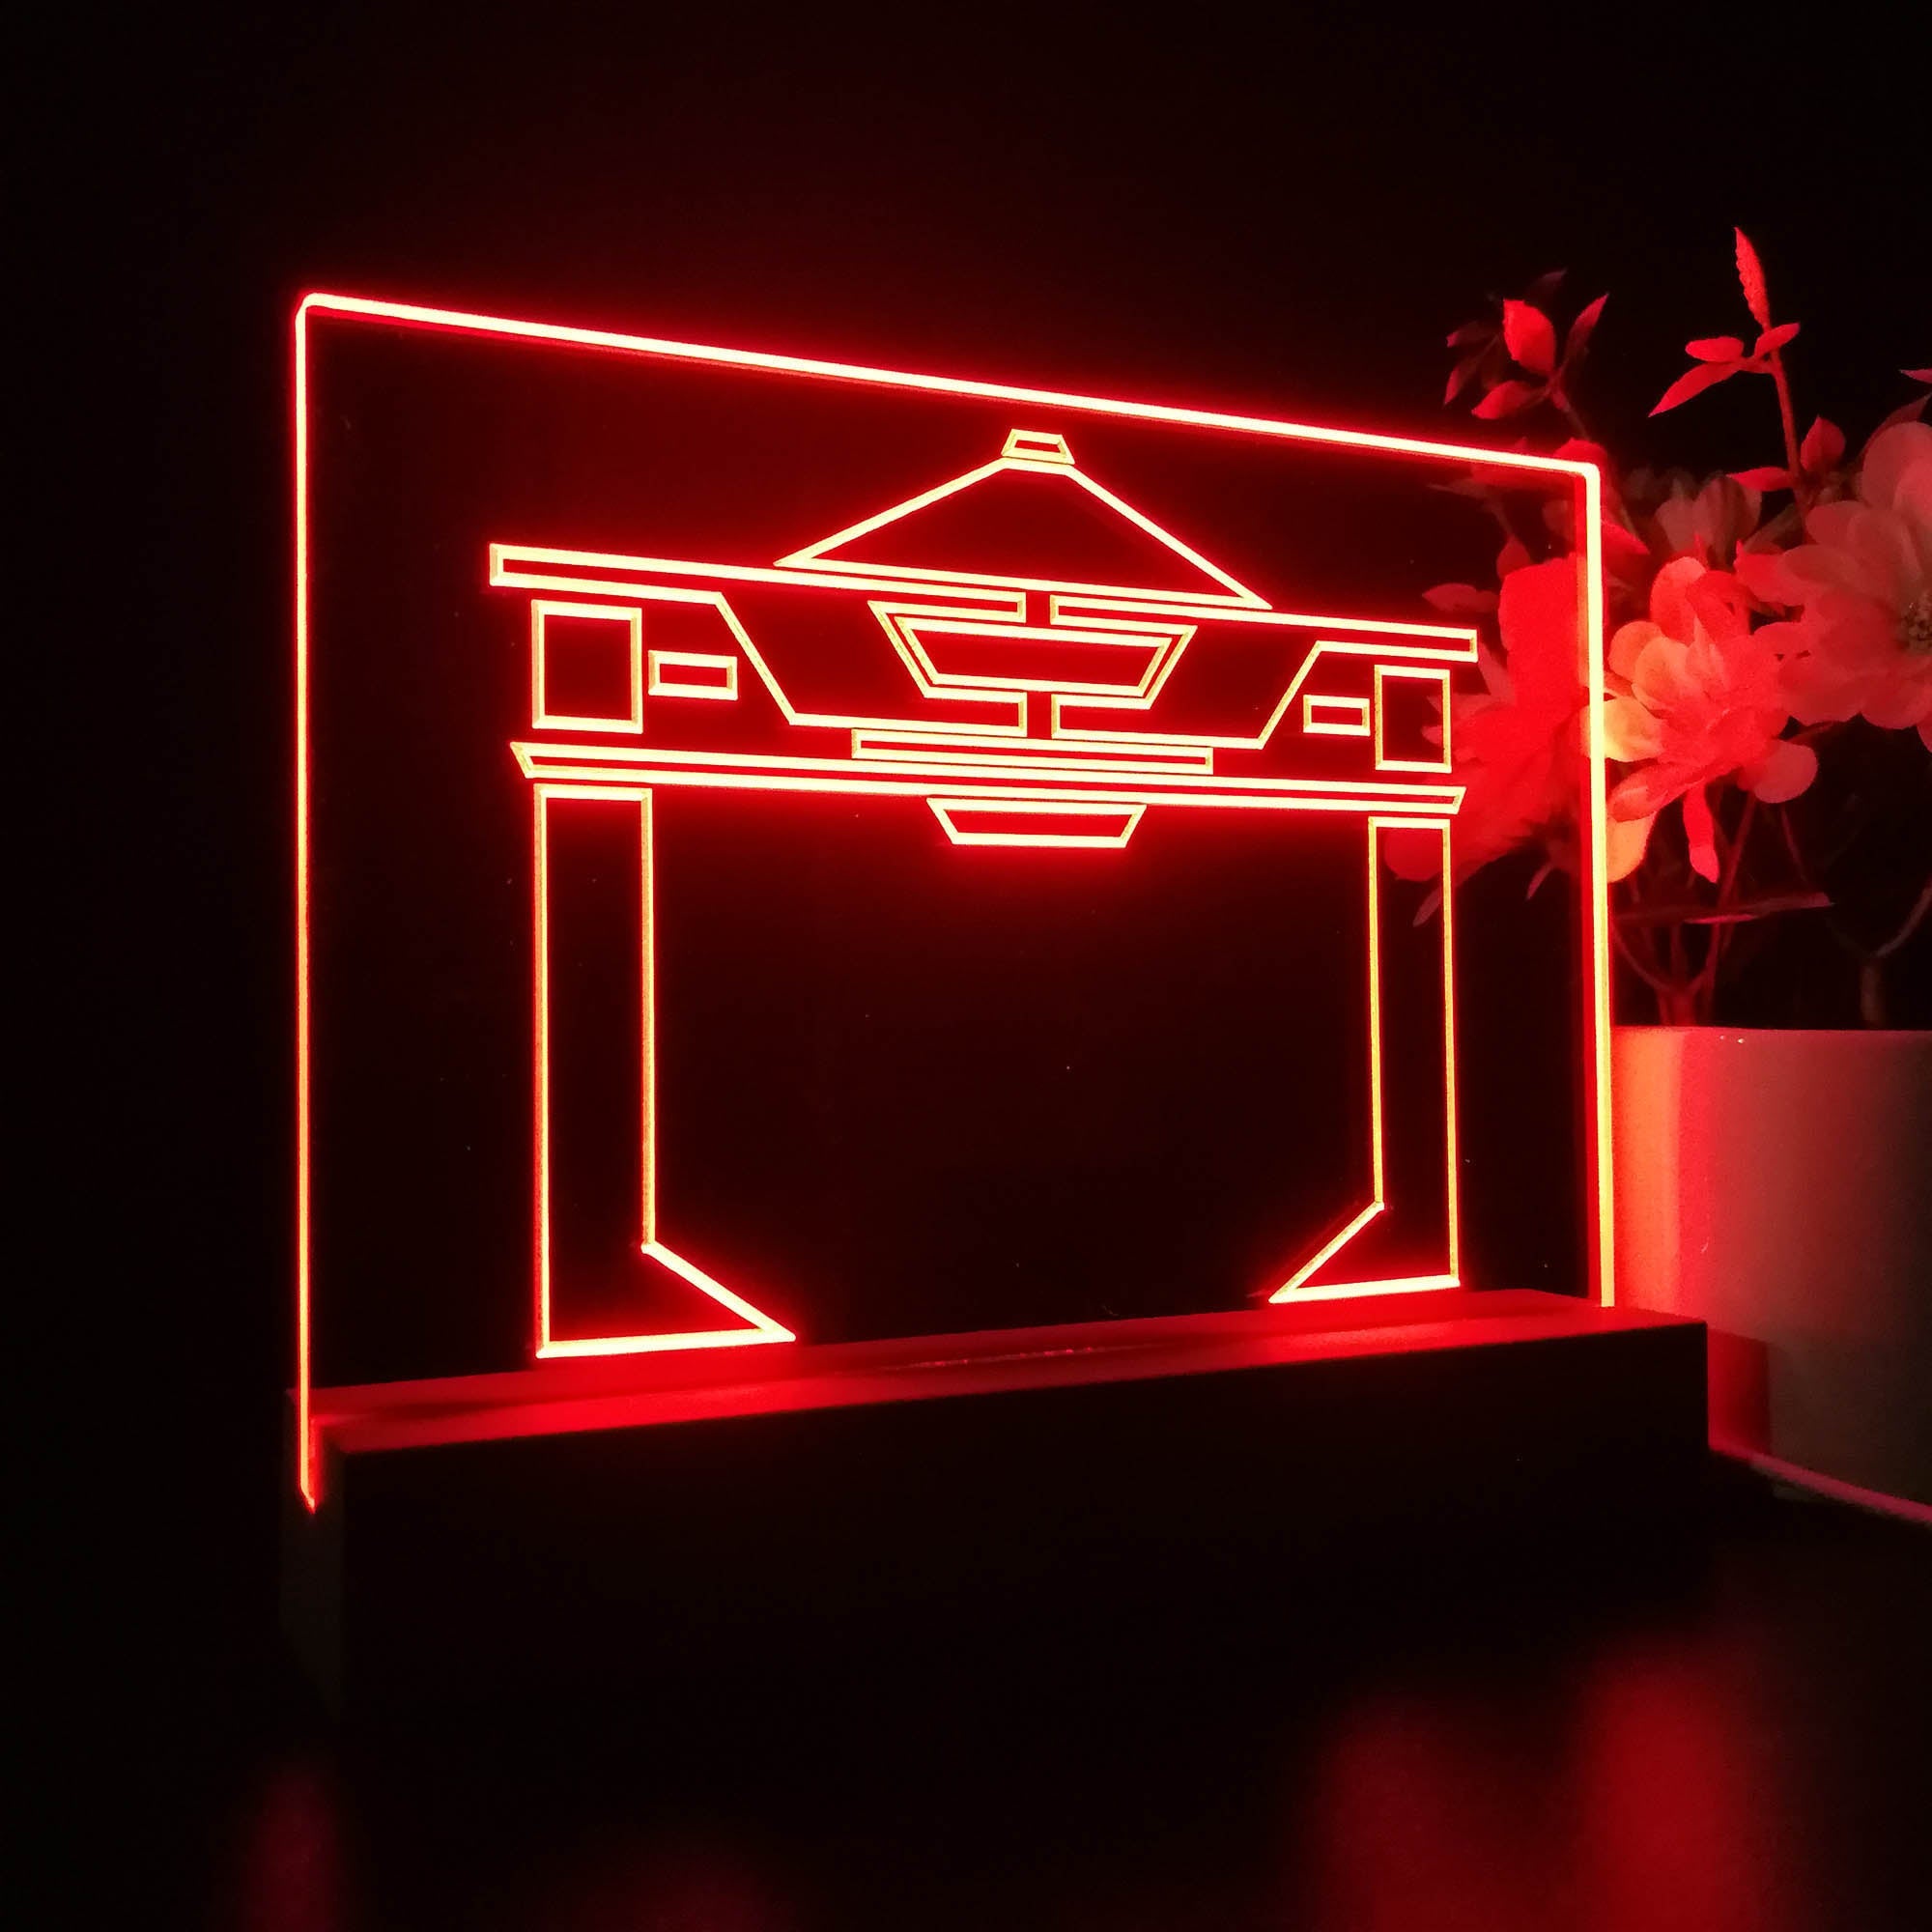 Tron Recognizer Game Room LED Sign Lamp Display